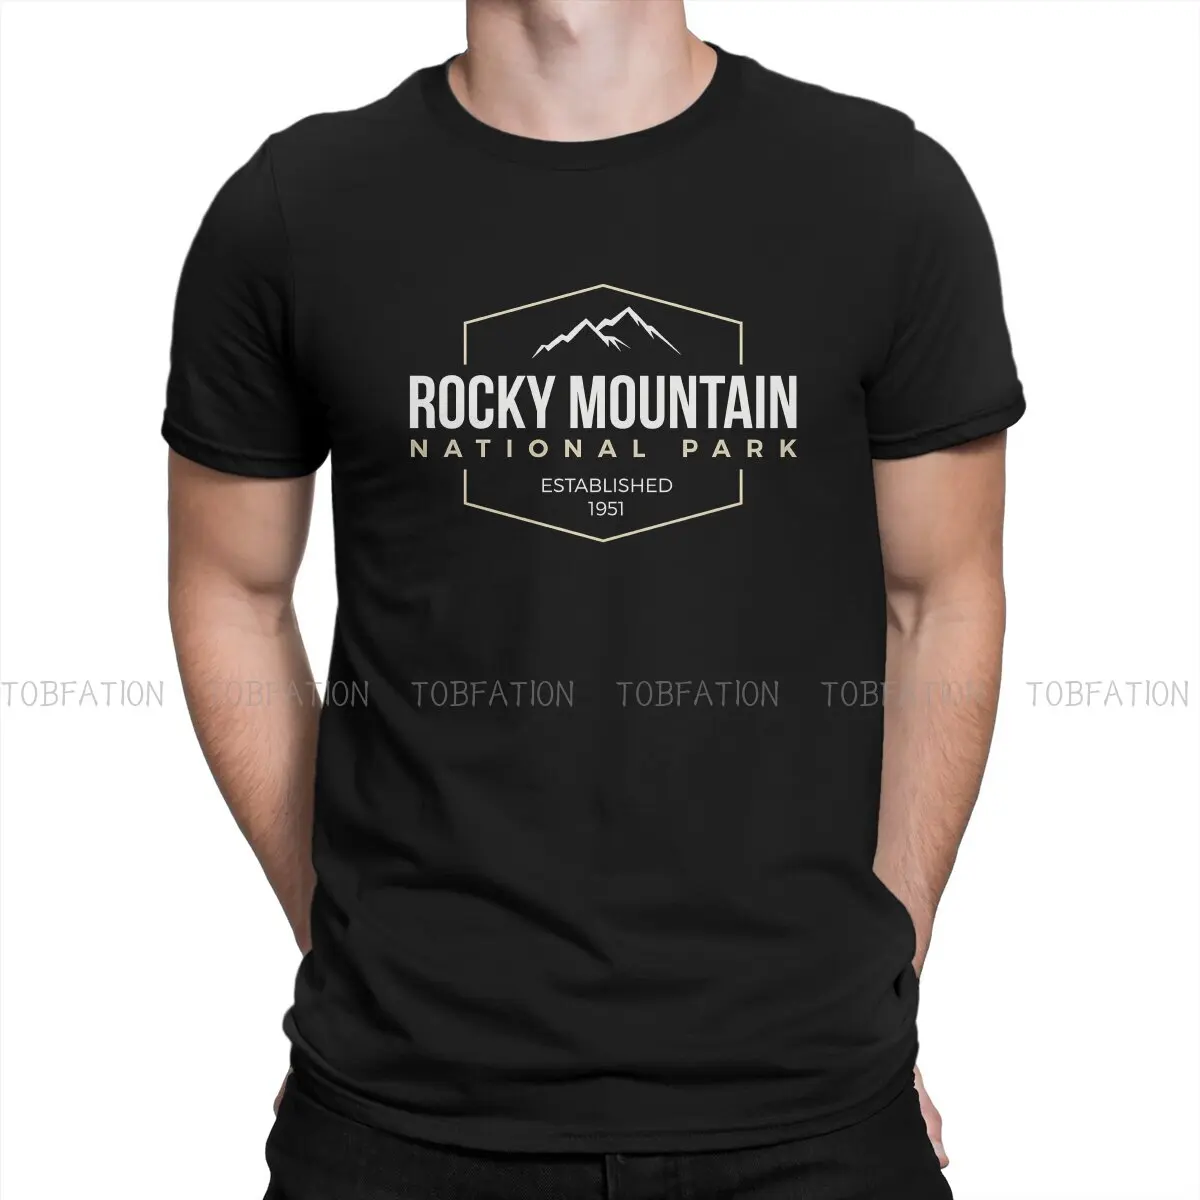 

Rocky Mountain National Park Hip Hop TShirt Climbing Outdoor Sports Printing Tops T Shirt Male Tee 100% Cotton Gift Clothes